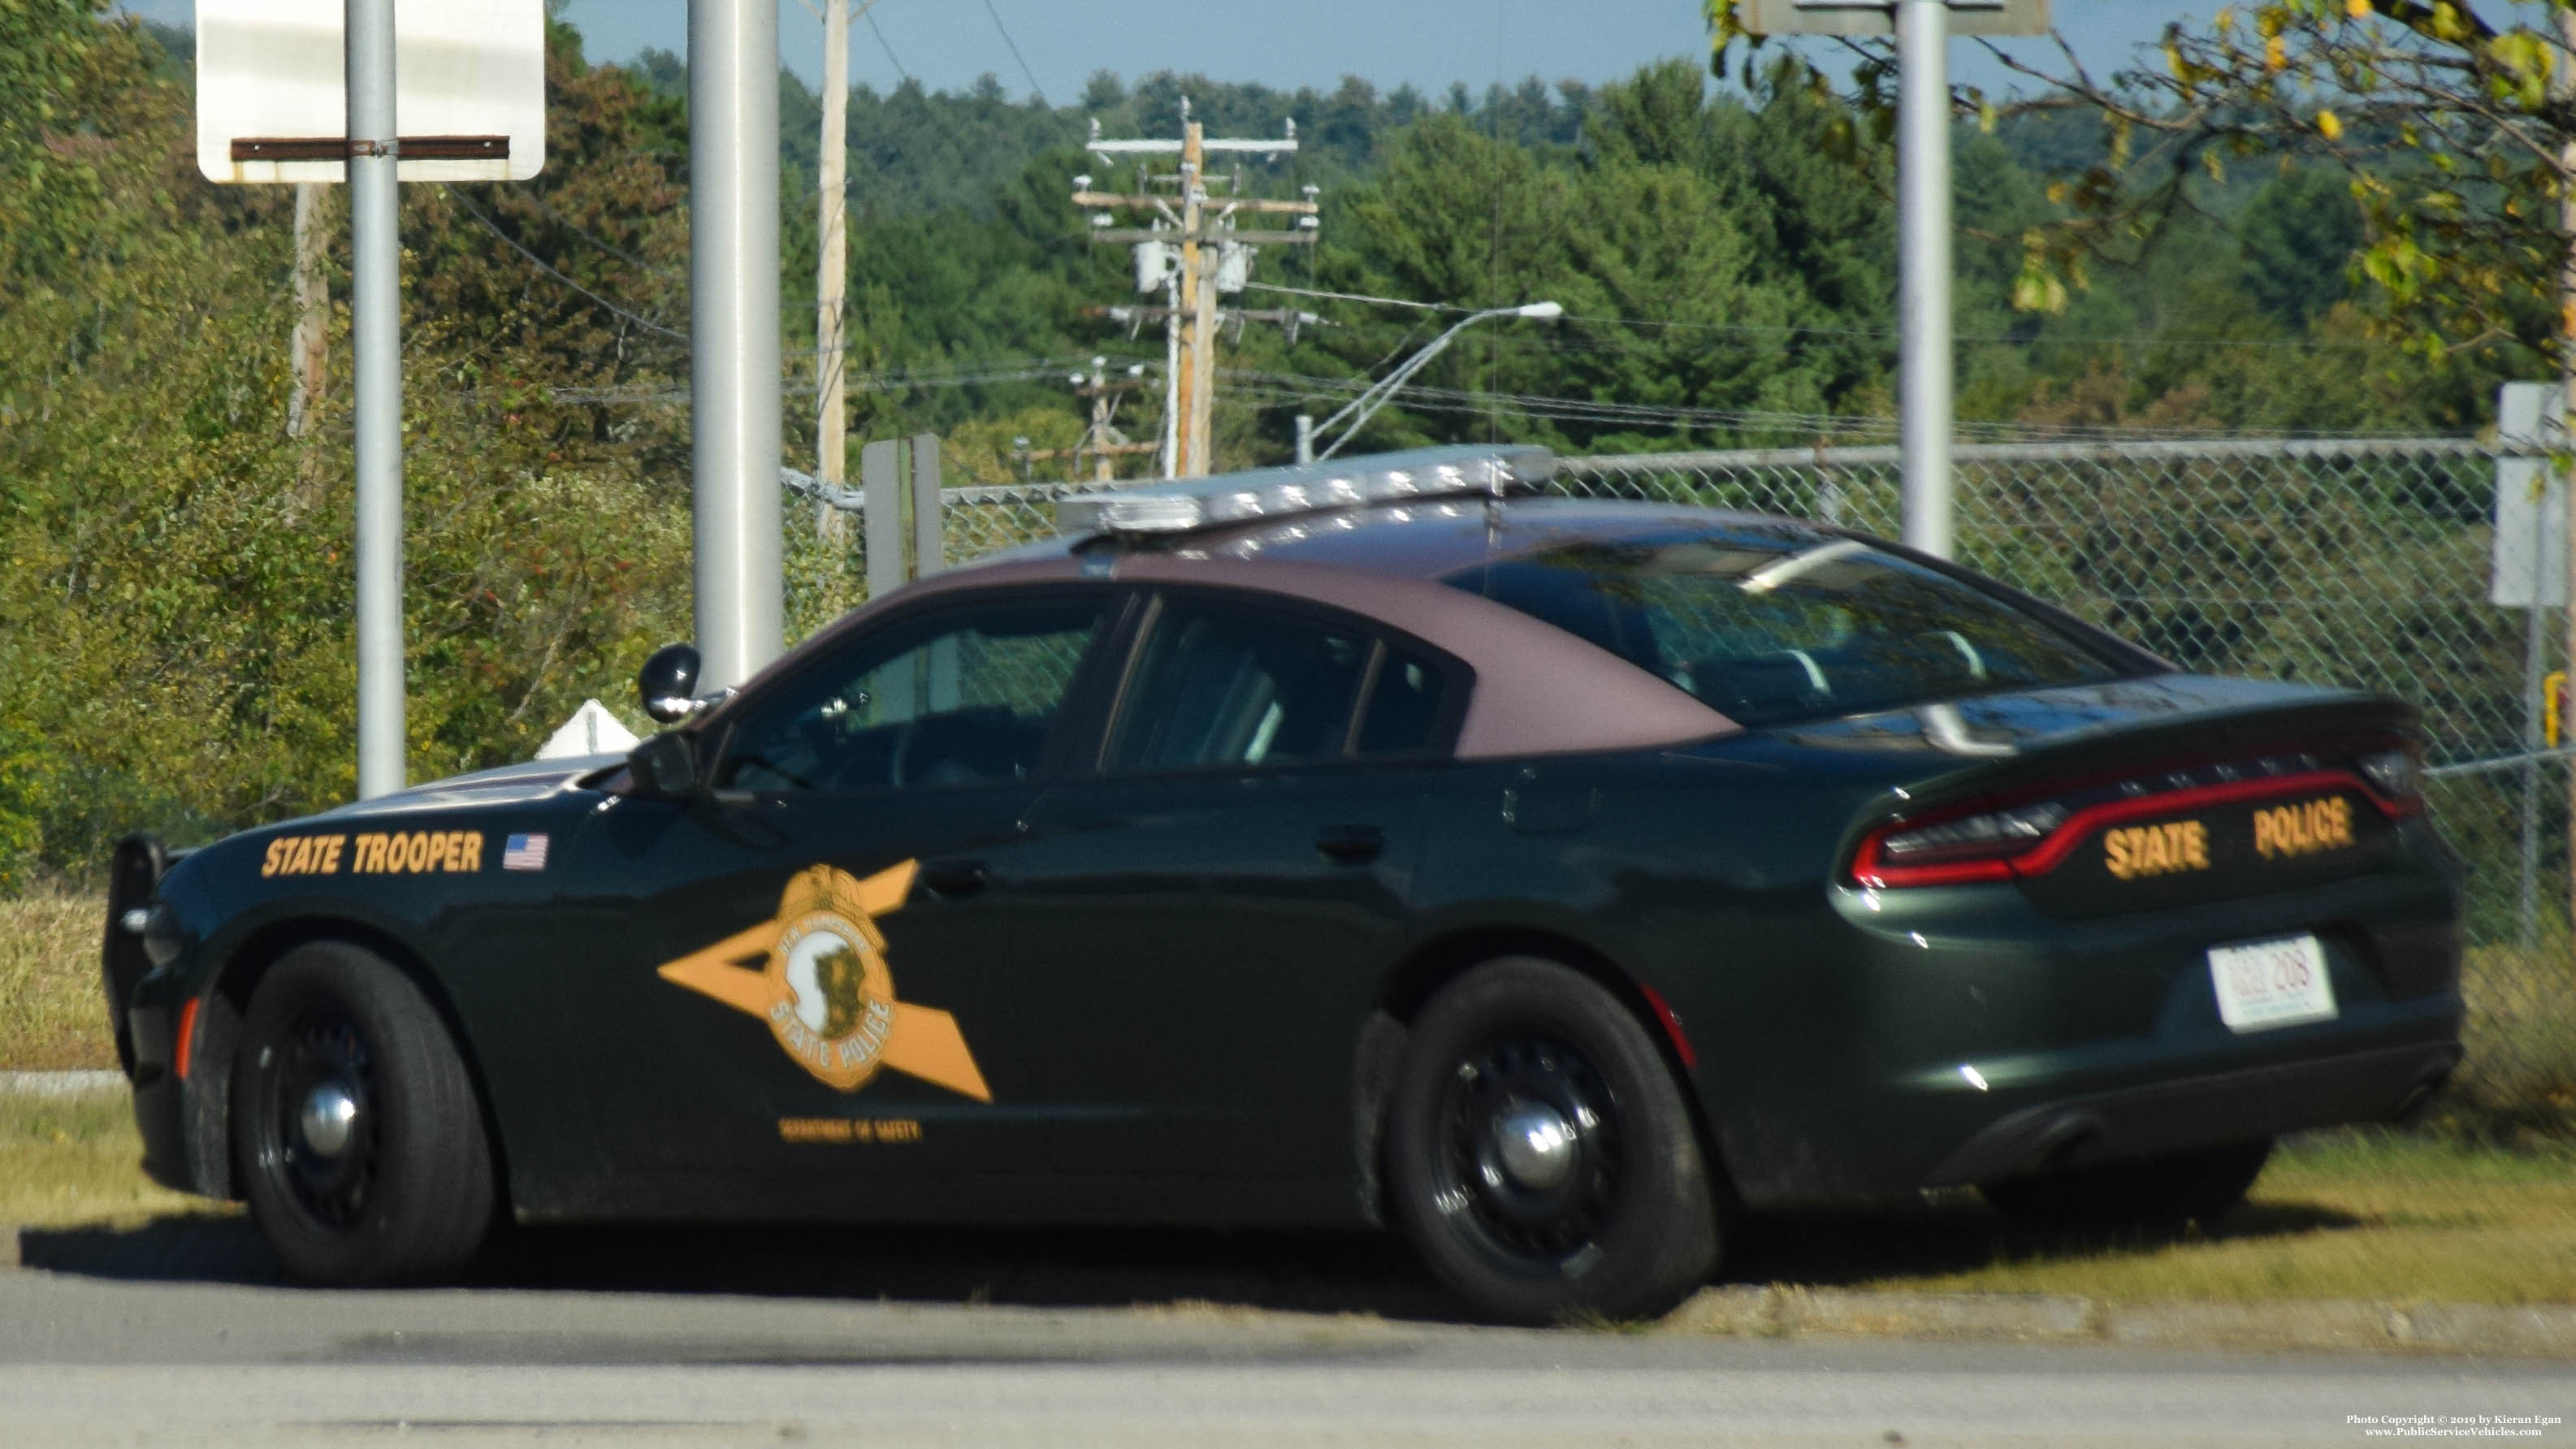 A photo  of New Hampshire State Police
            Cruiser 208, a 2015-2019 Dodge Charger             taken by Kieran Egan